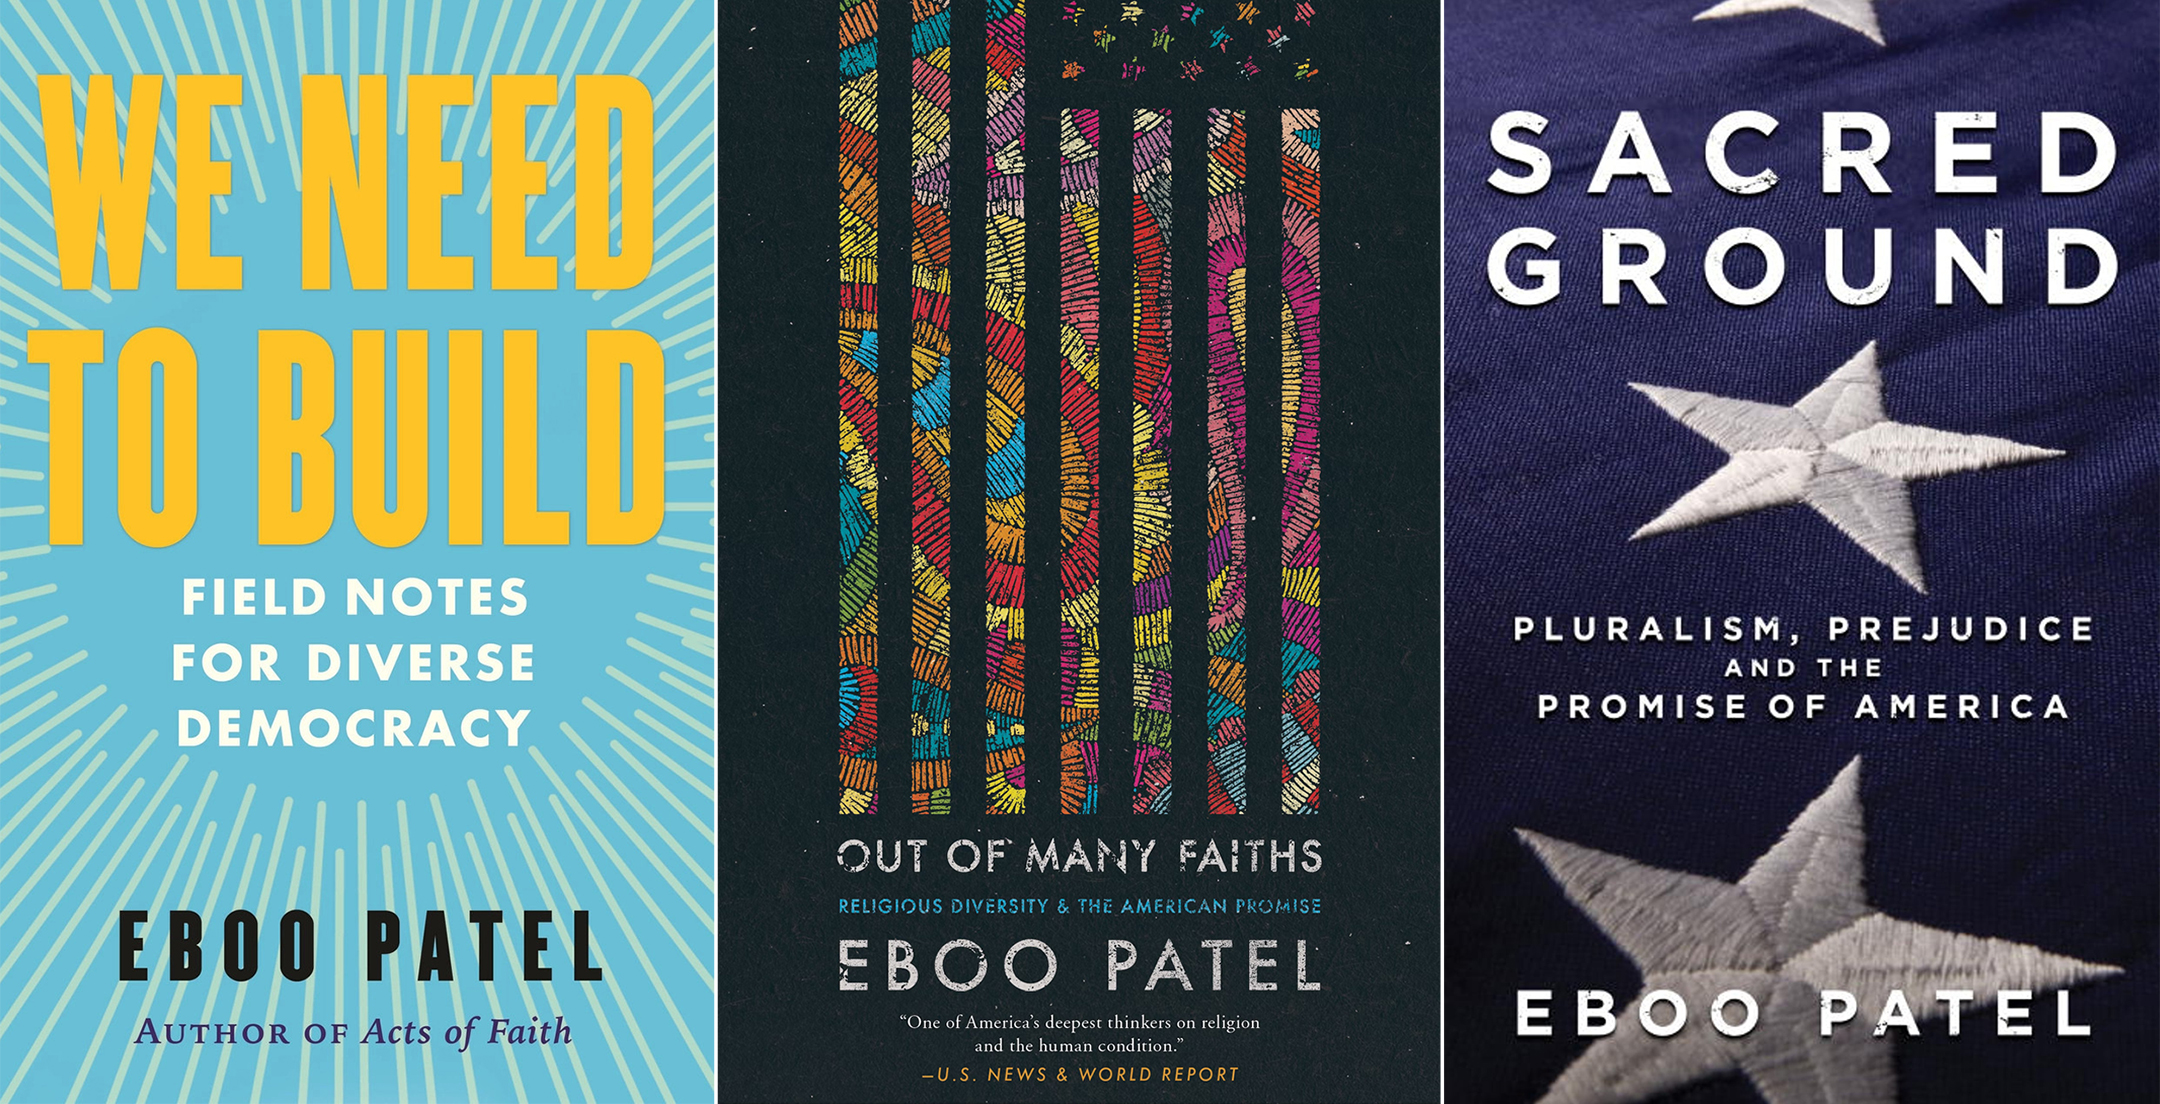 Covers of three of Eboo Patel's books, from left: We Need to Build, Out of Many Faiths, and Sacred Ground